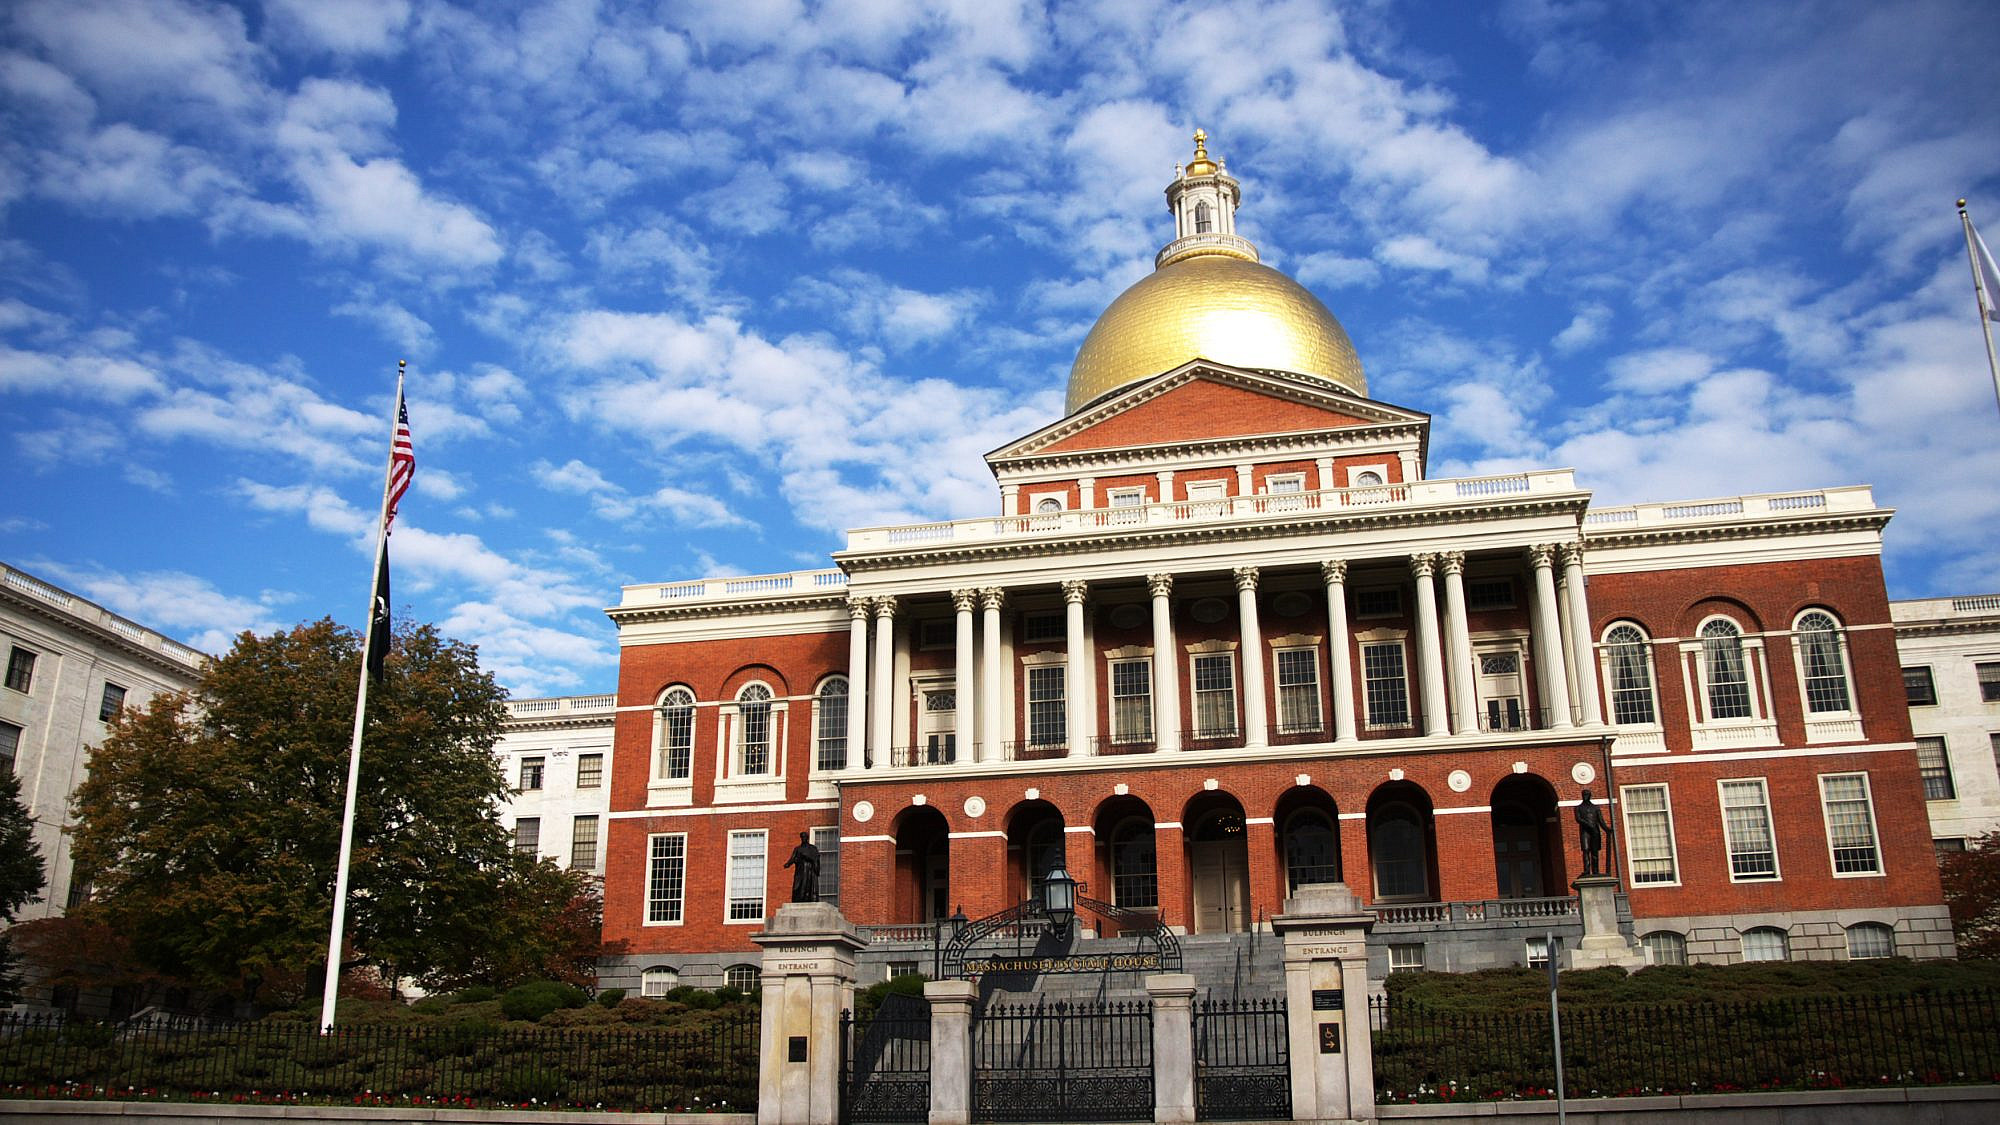 The Massachusetts State House on Beacon Hill in Boston. Credit: Wikimedia Commons.